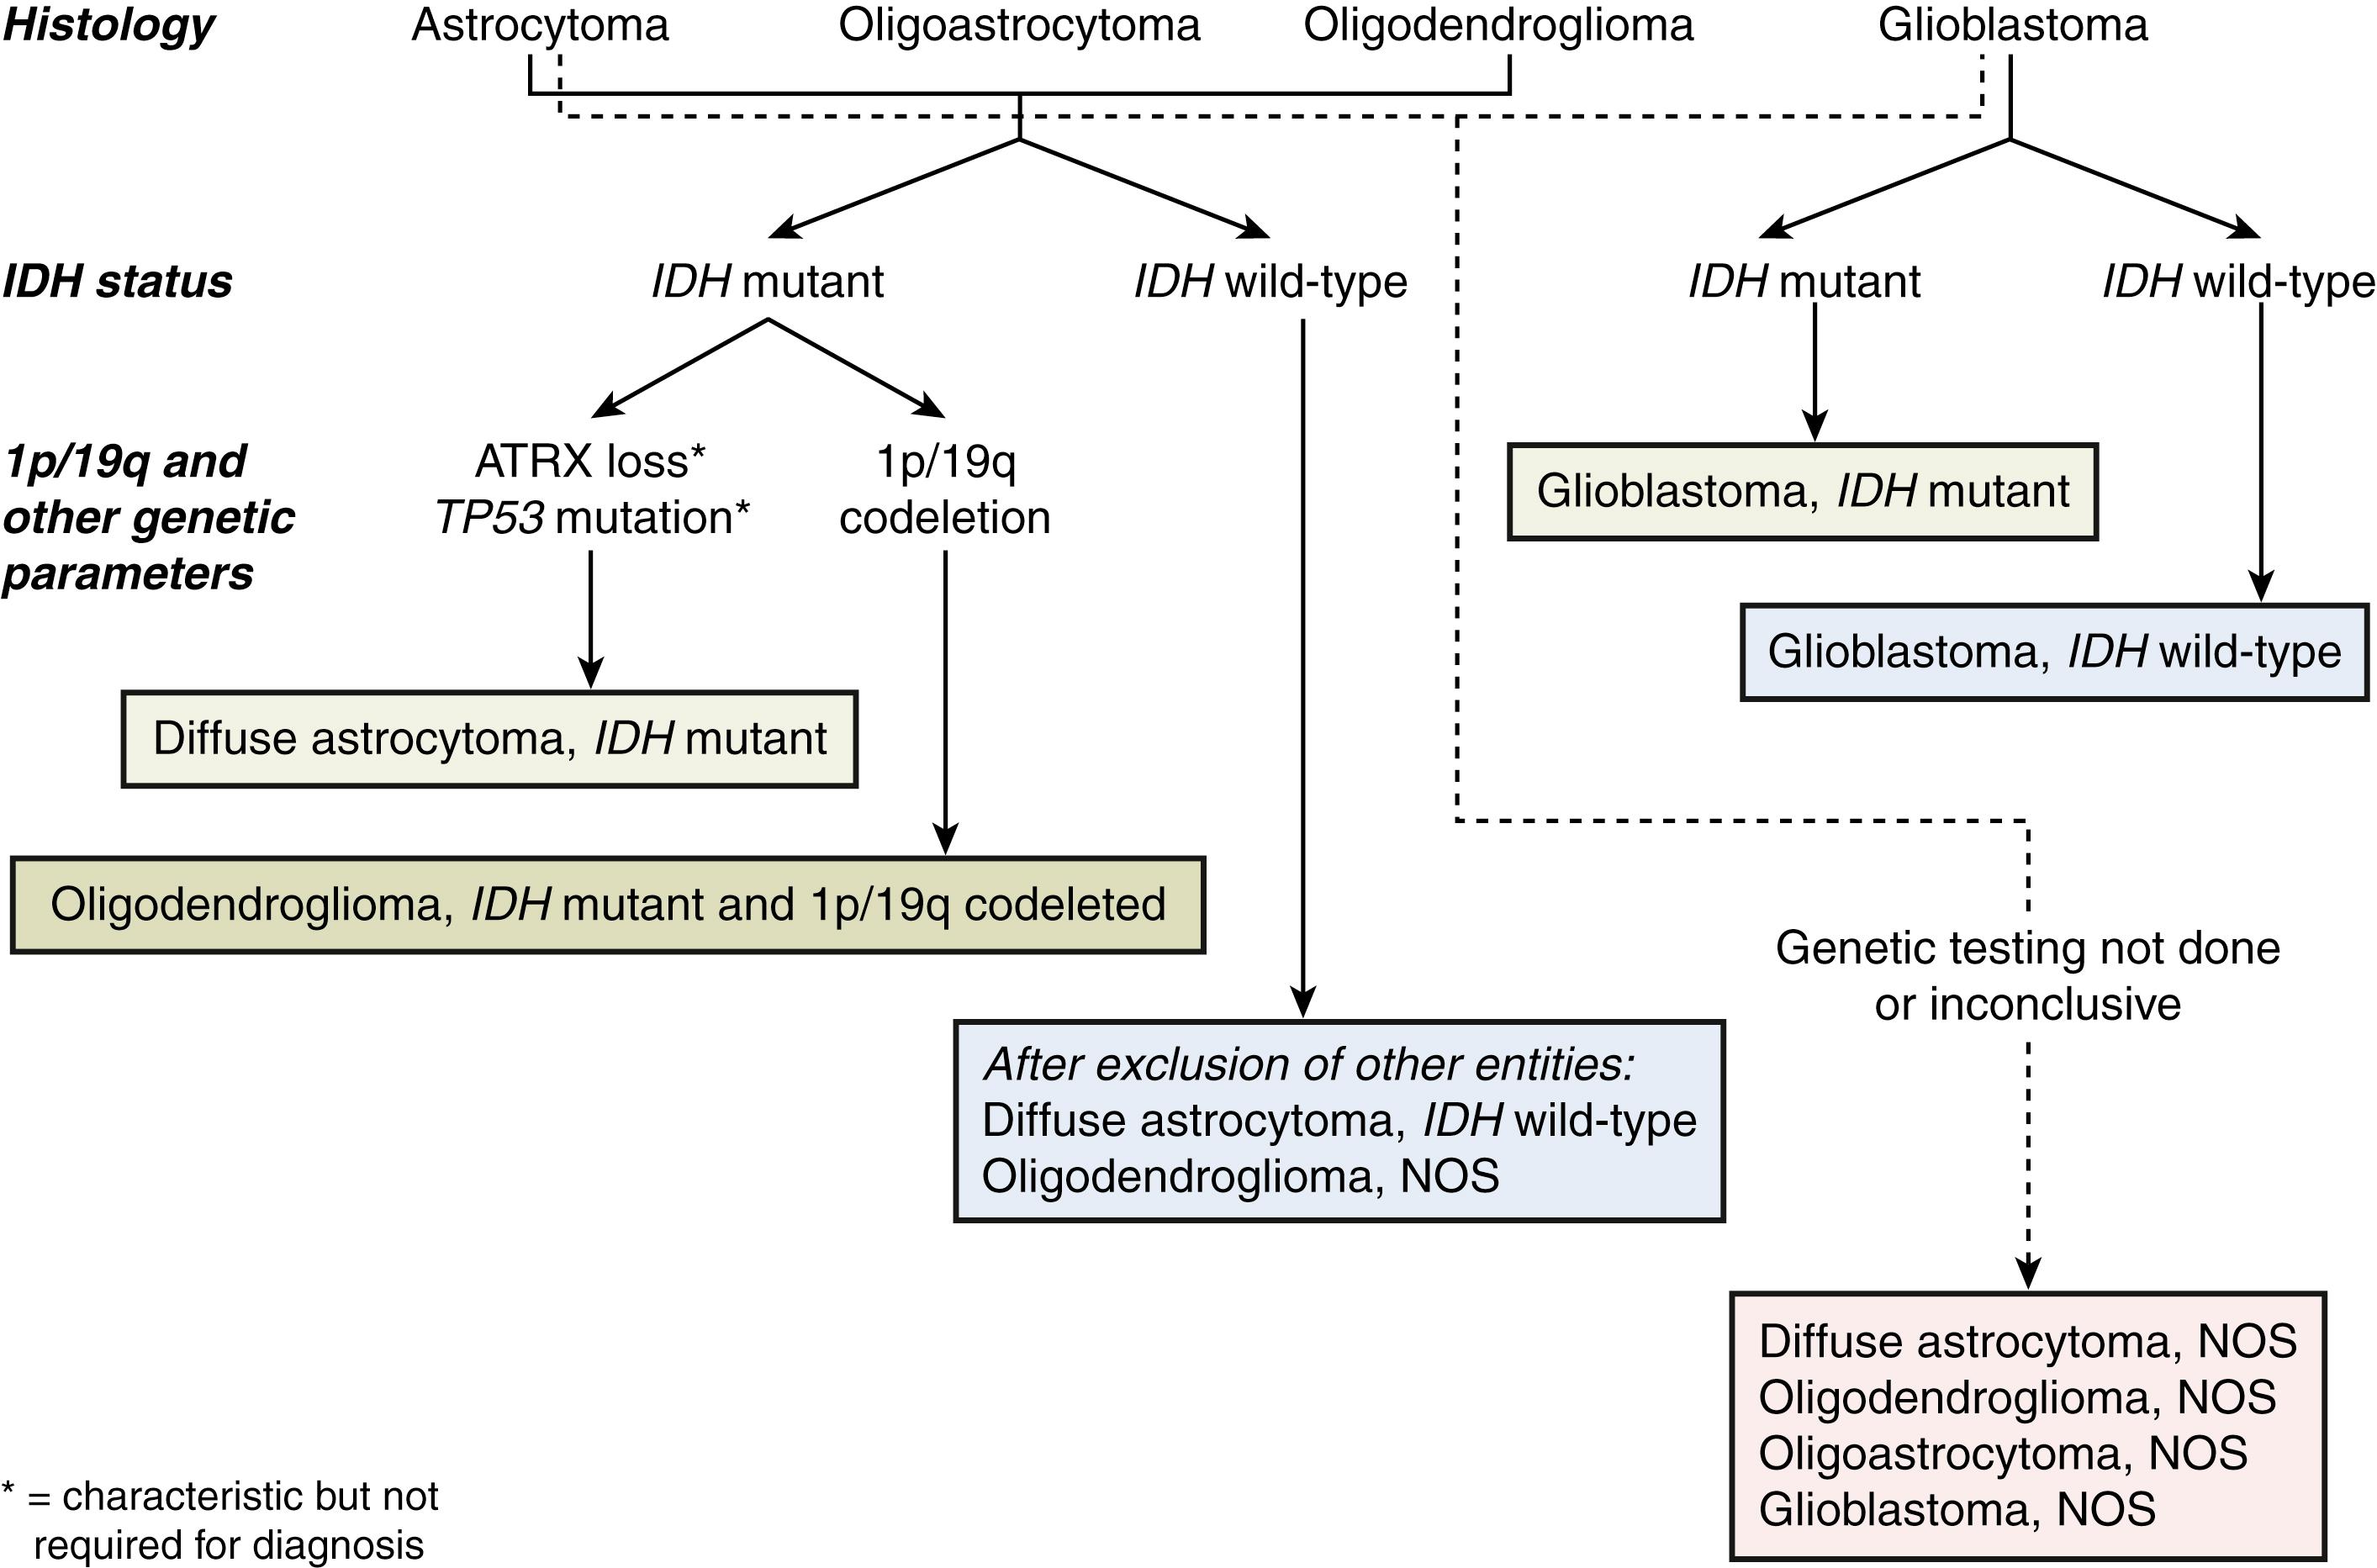 Fig. 11.3, A simplified algorithm for the classification of gliomas based on histologic and genetic features. Profiling the molecular characteristics of cancers allows for a more accurate classification of tumors; in some instances, genetic features may supersede morphologic characteristics in achieving an “integrated” diagnosis. NOS , Not otherwise specified.